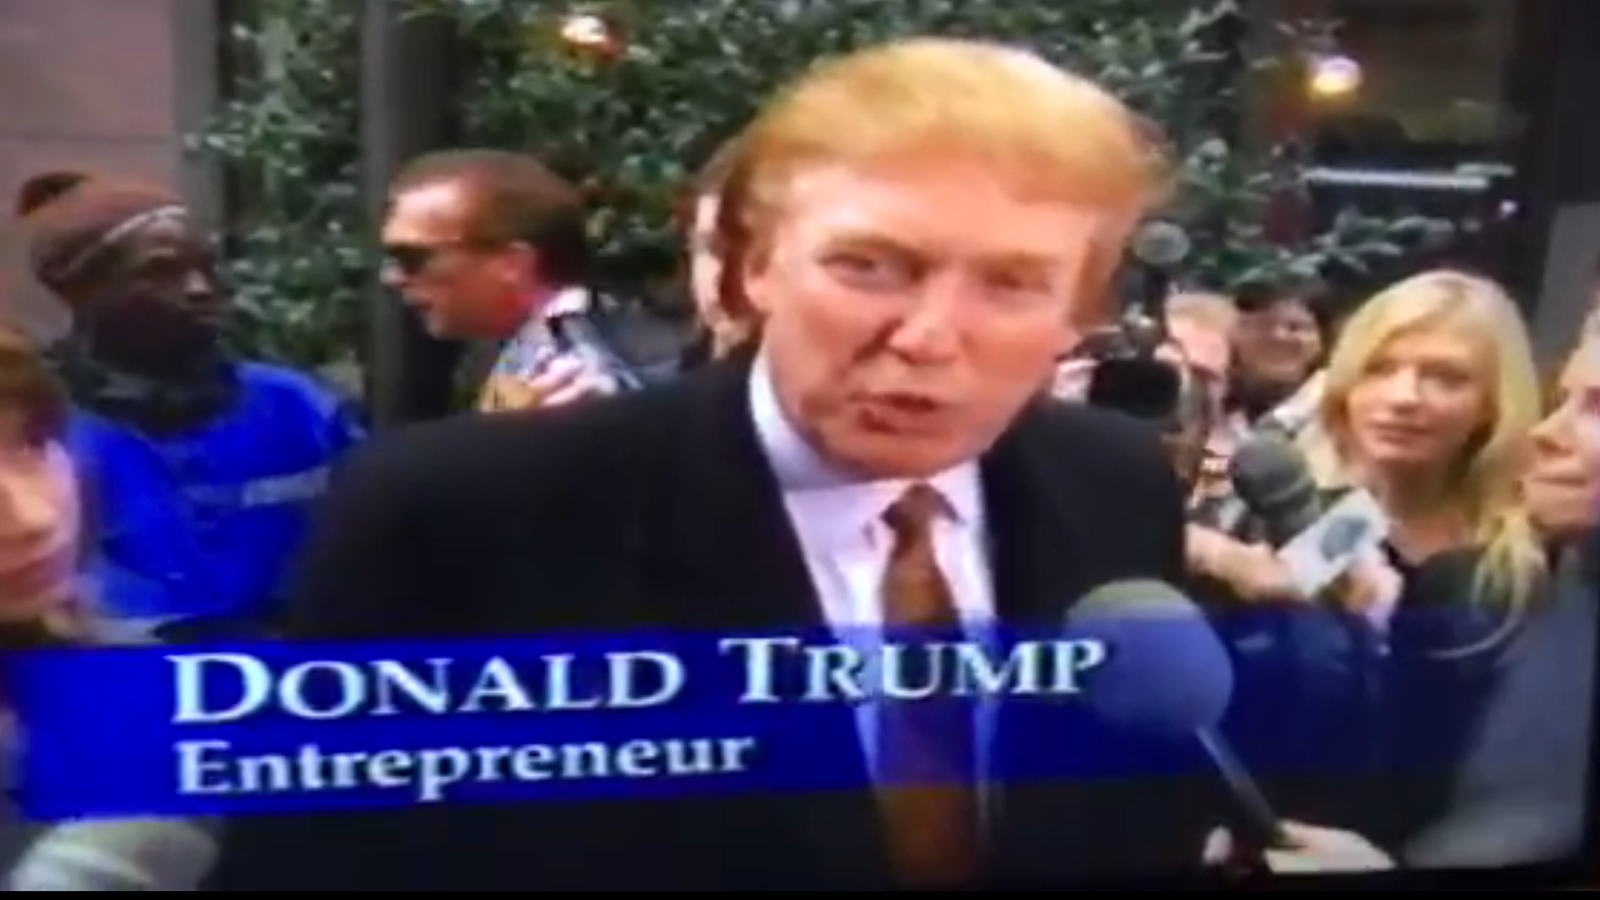 Womens Softcore Porn - Trump Appeared in a 2000 Softcore Porn Video Featuring Women ...